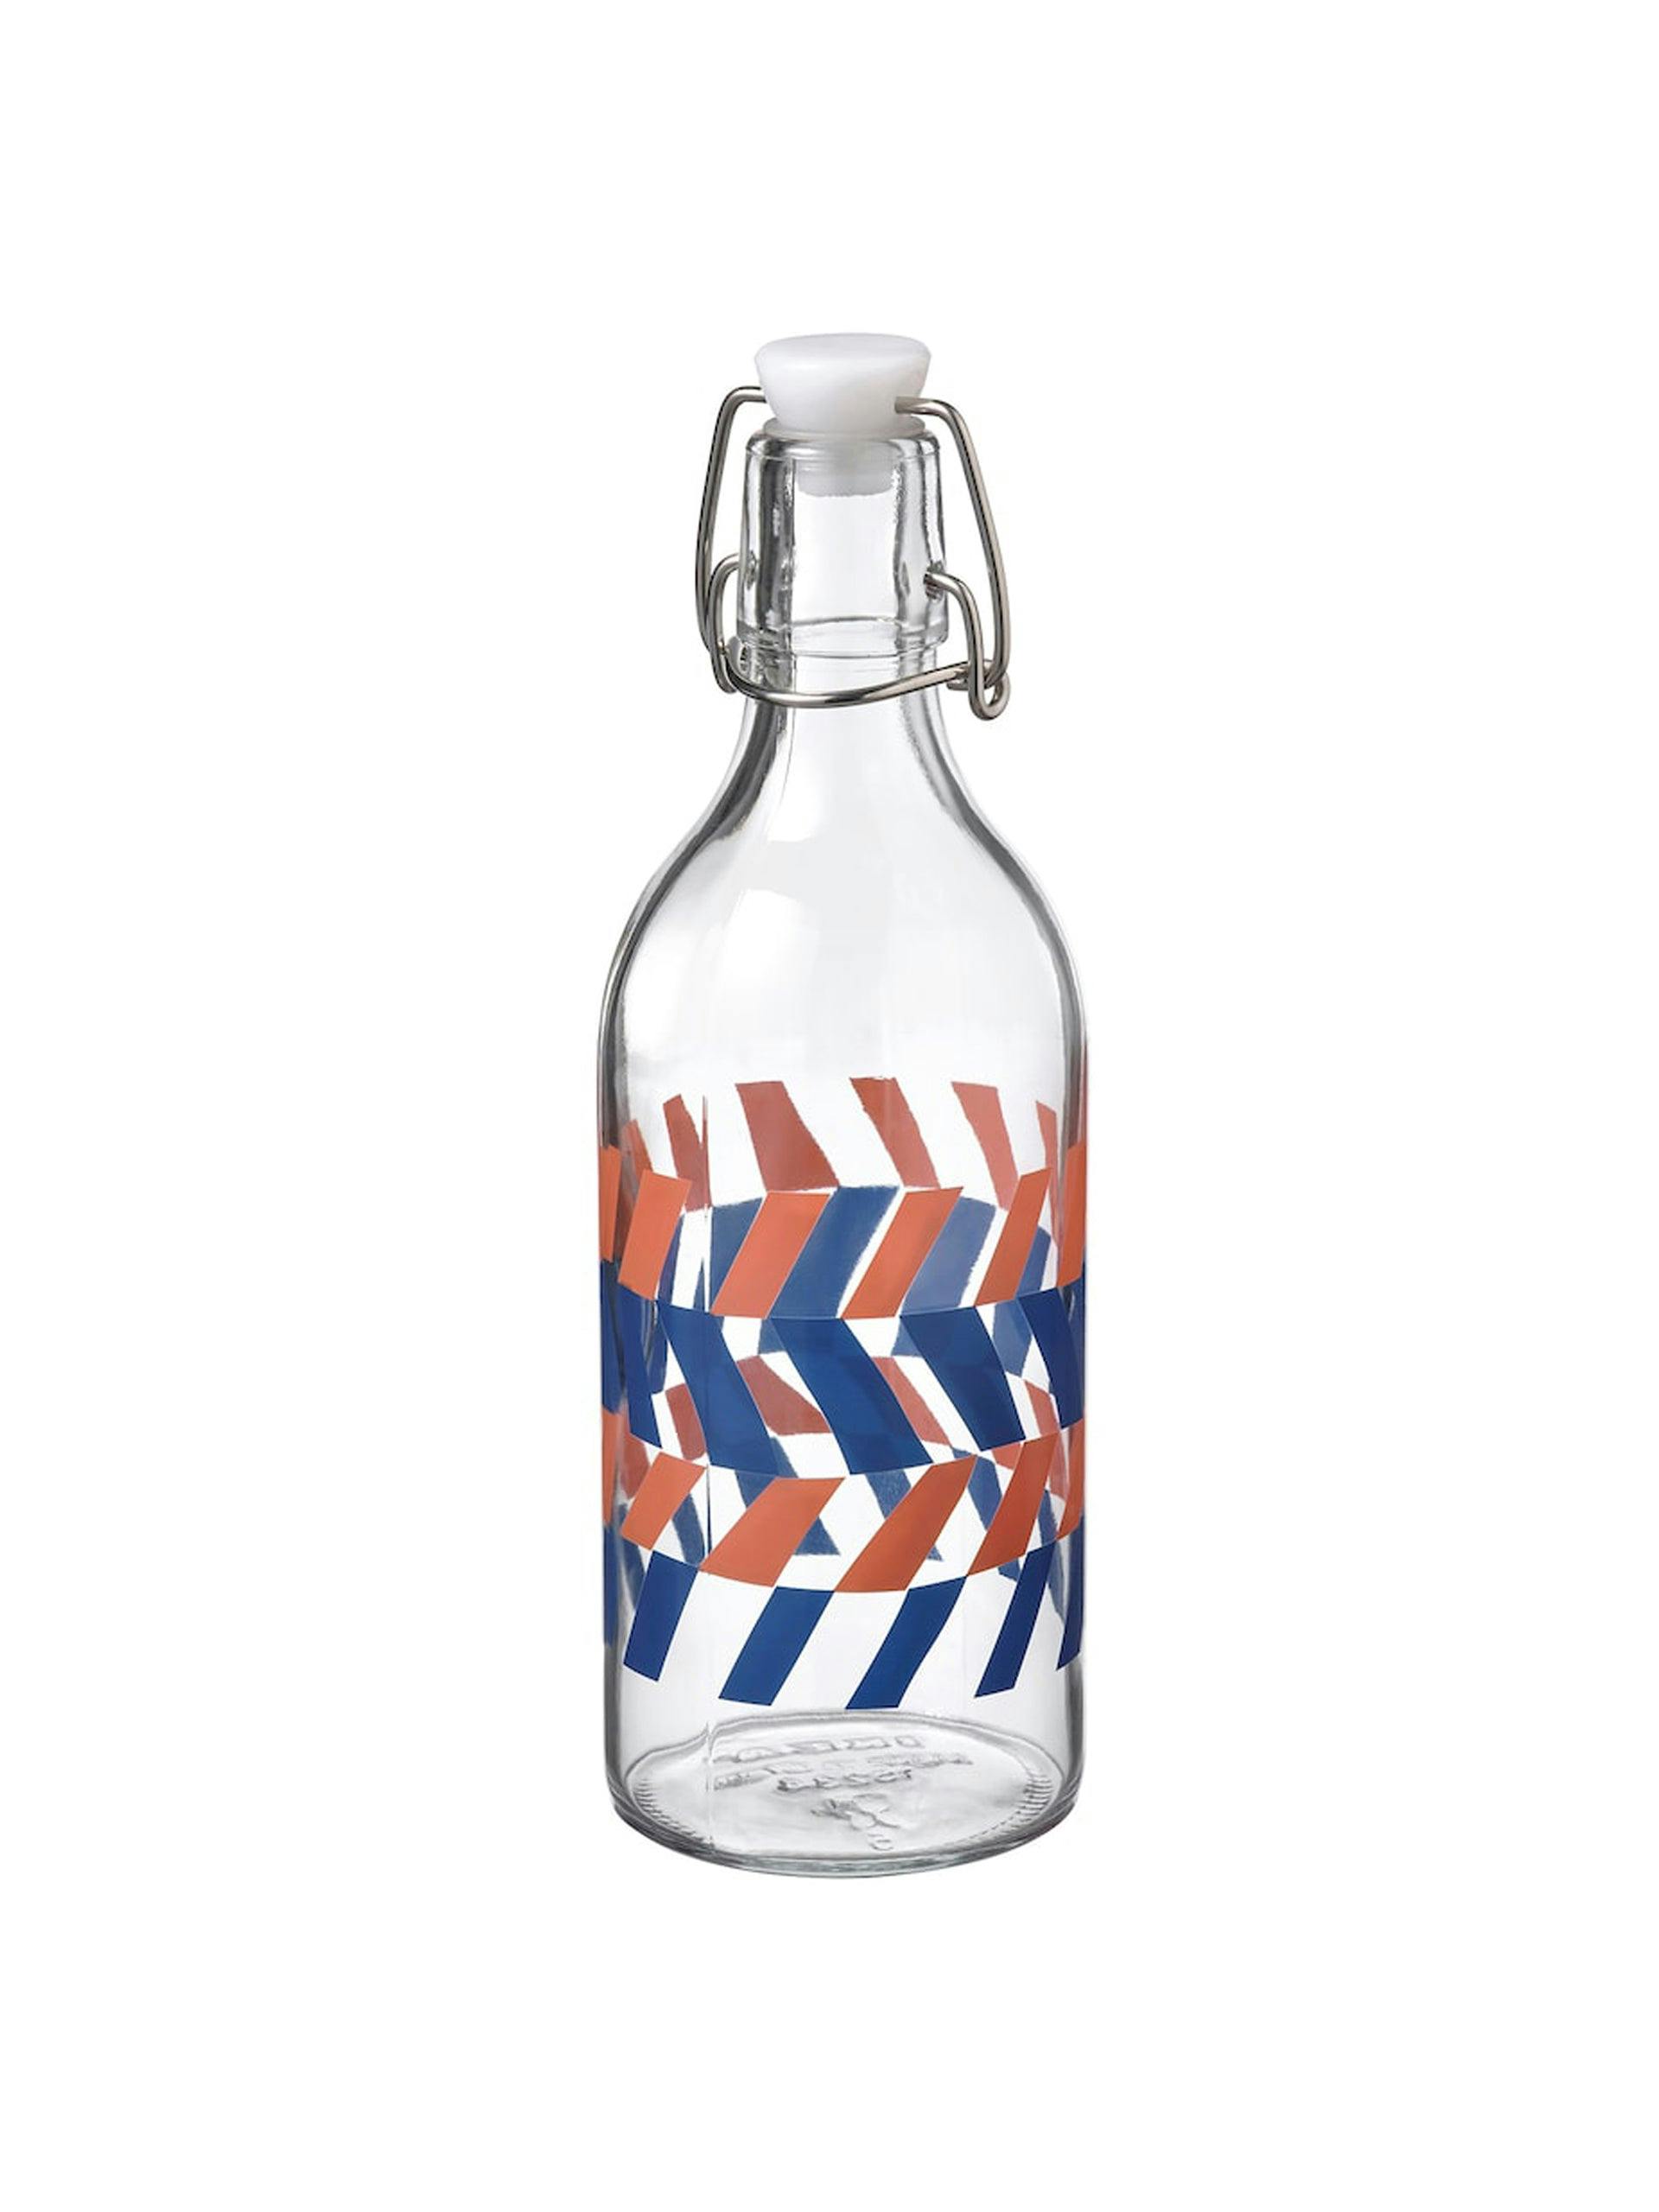 Glass bottle with stopper in blue and orange